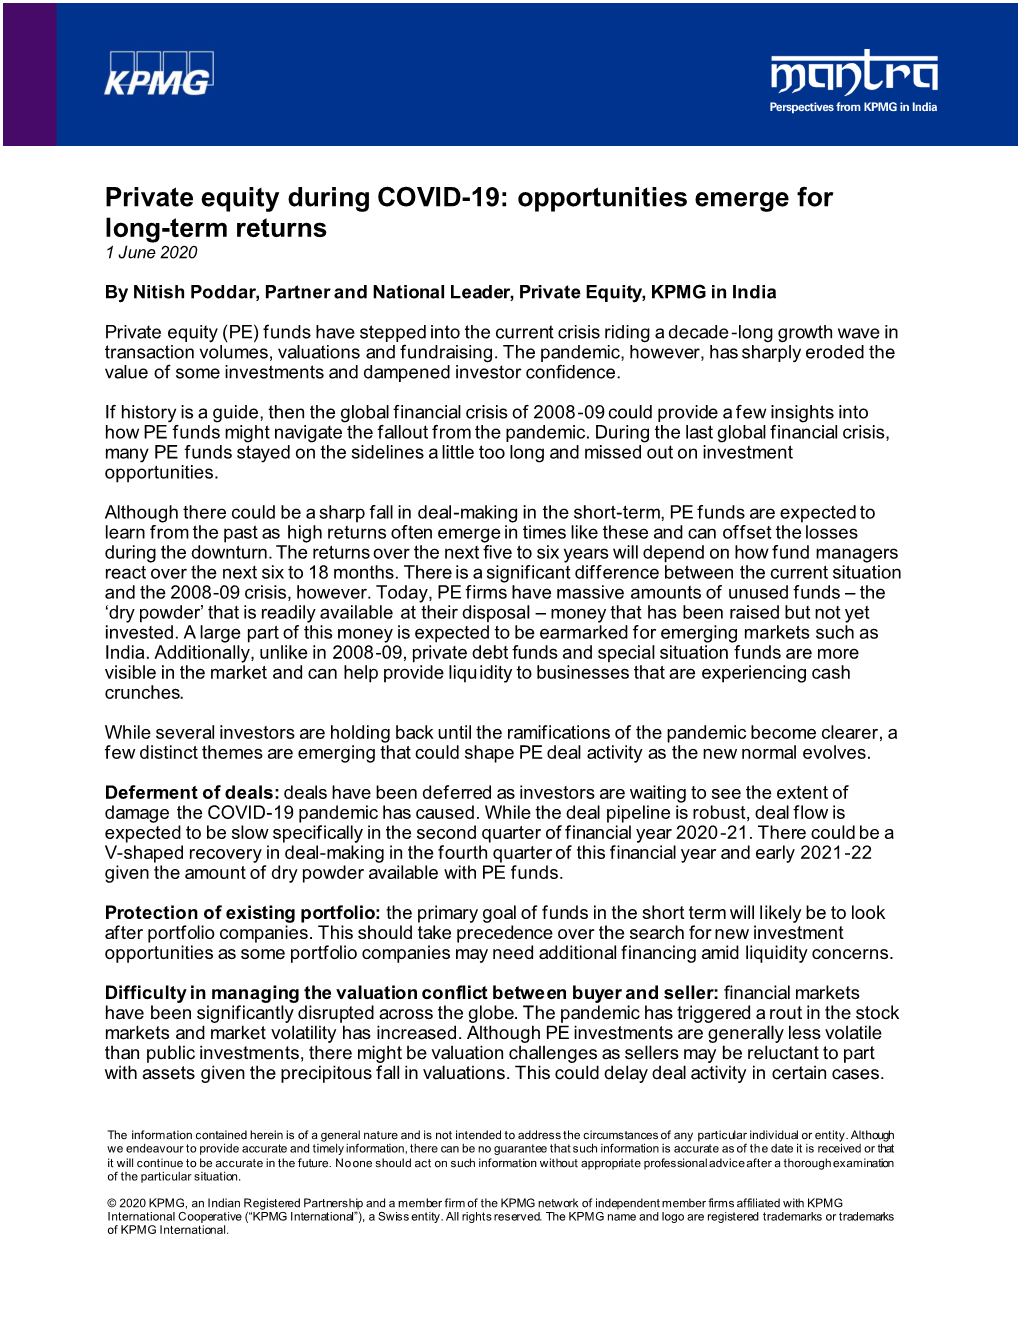 Private Equity During COVID-19: Opportunities Emerge for Long-Term Returns 1 June 2020